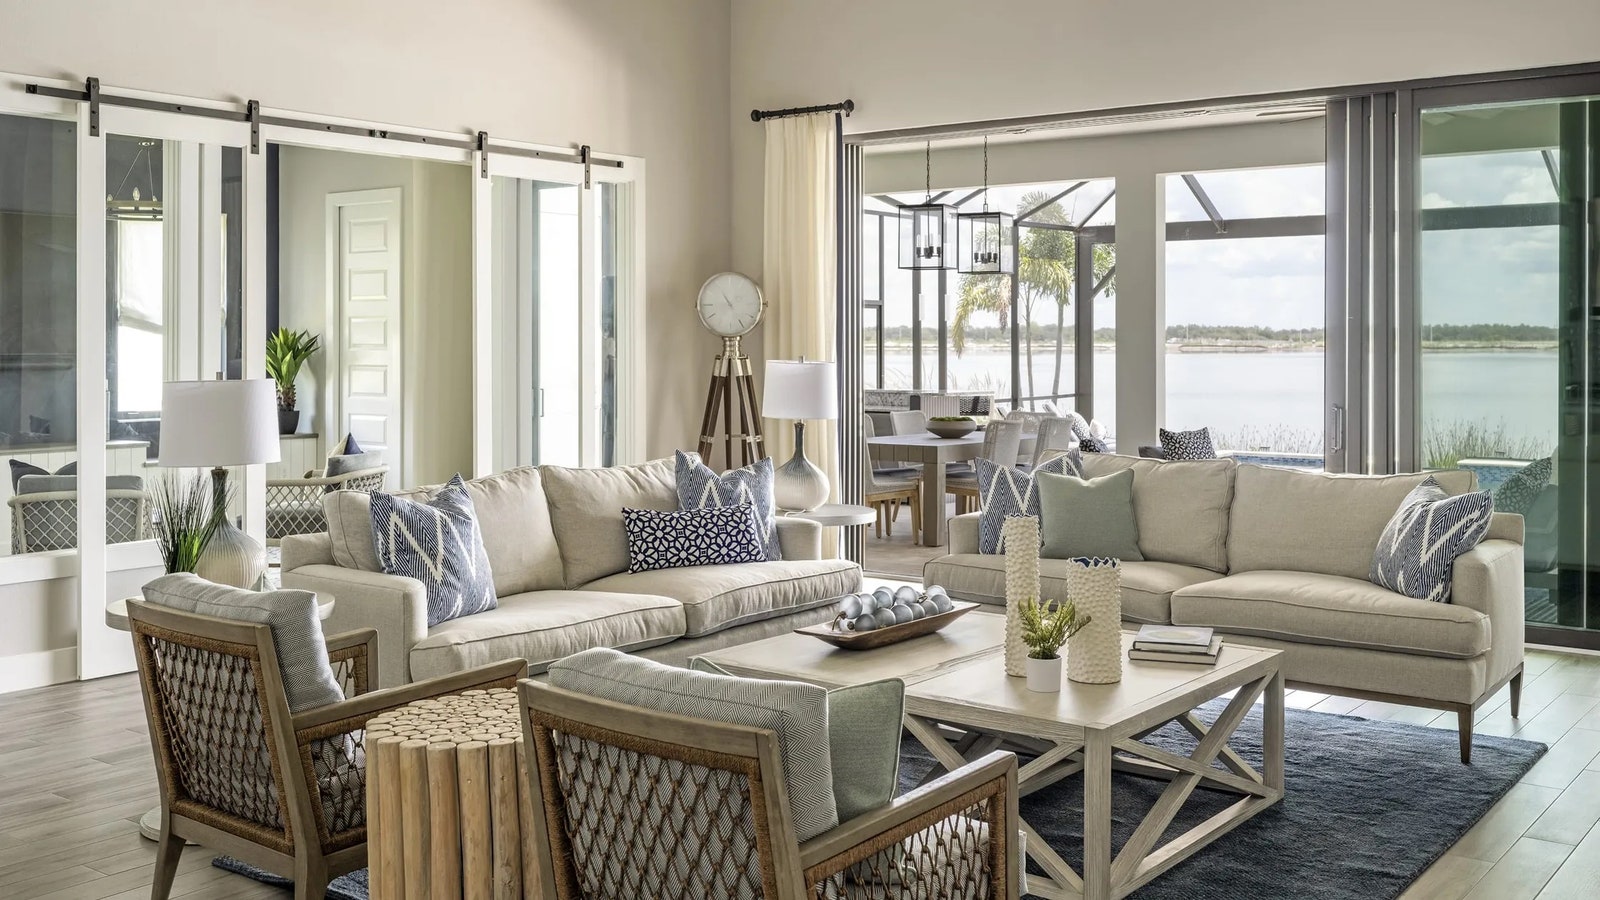 Coastal meets traditional in this living room with a view which Trade Mark Interiors devised for empty nester clients in...